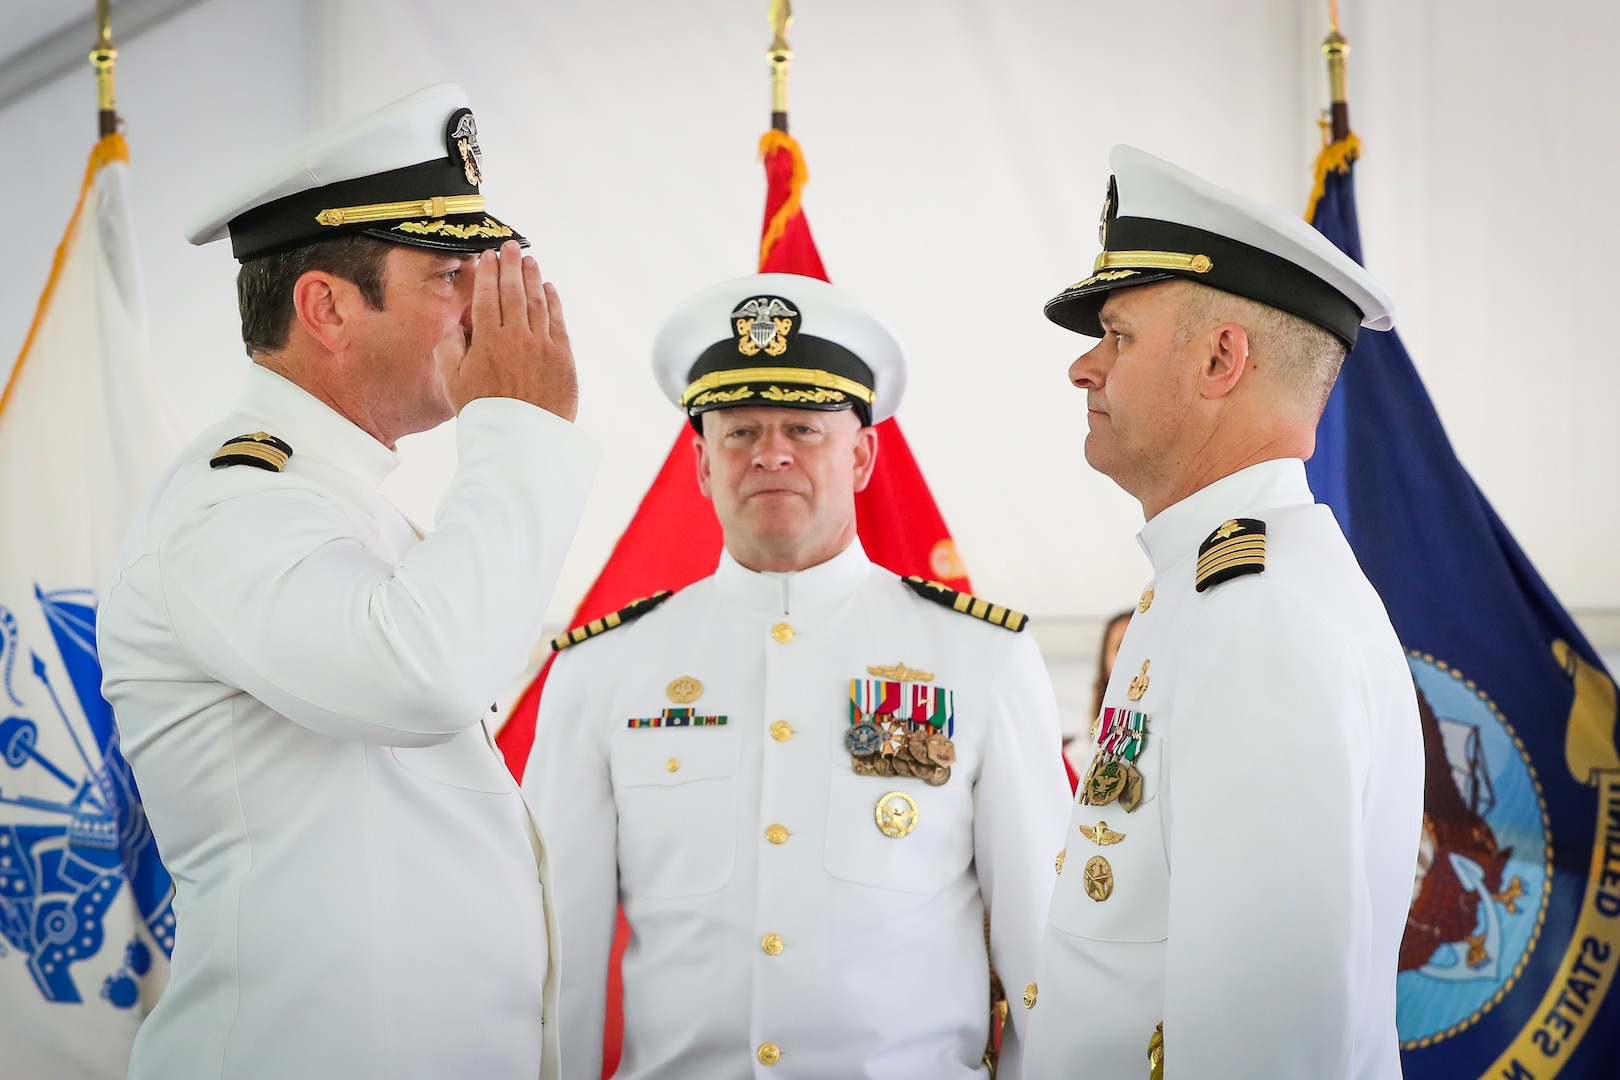 Rear Adm. Bradley Andros, commander of the Navy Expeditionary Combat Command (center), presides over the change of command ceremony in which Capt. Stephen Duba (left) relieved Capt. Eric Correll as commanding officer of Naval Surface Warfare Center Indian Head Division at Naval Support Facility Indian Head, Md., Aug. 25.